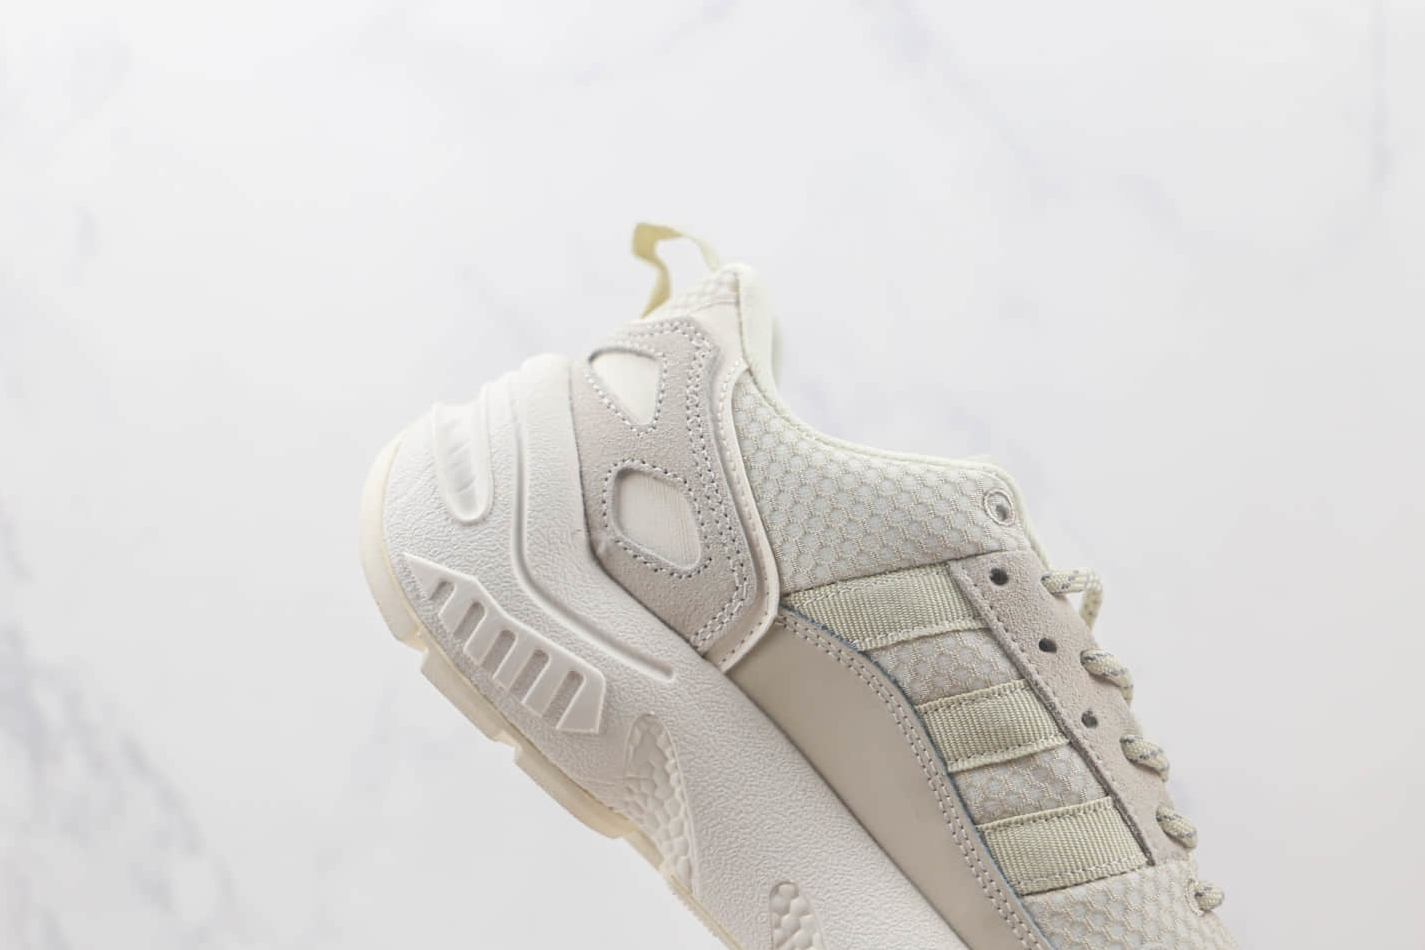 Adidas ZX 22 Boost 'Cream White Bliss' GY6697 - Stylish and Comfortable Sneakers